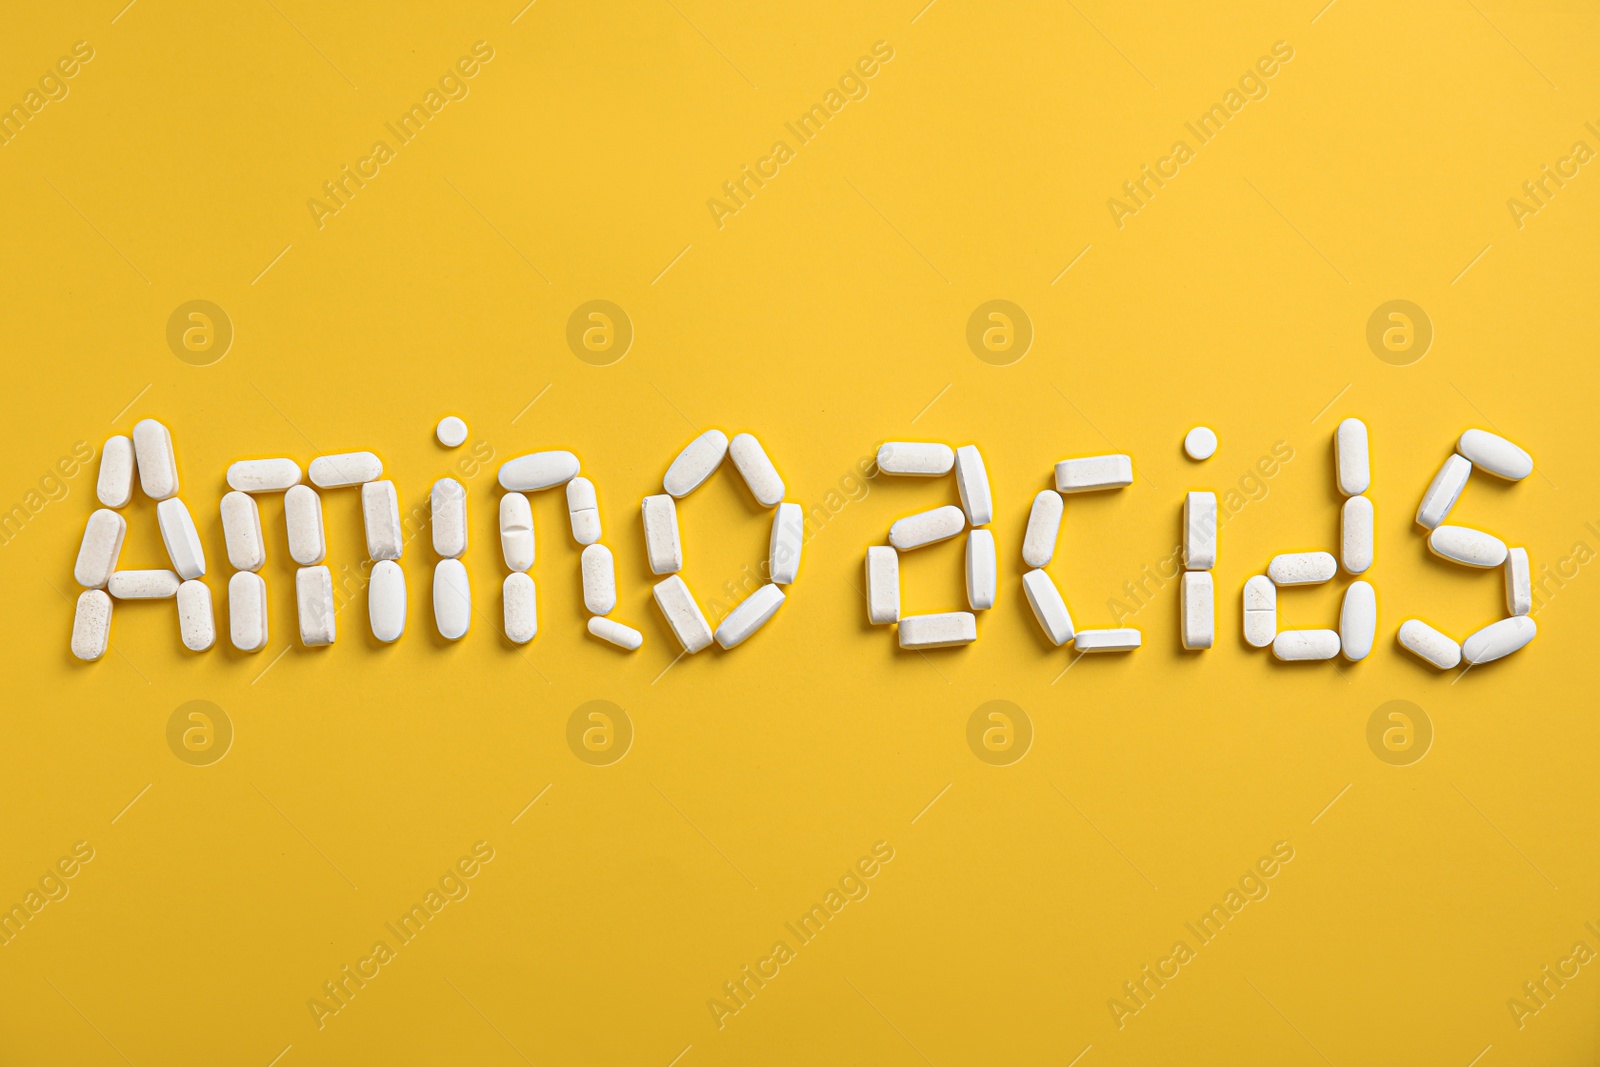 Photo of Words "AMINO ACIDS" made with pills on yellow background, flat lay